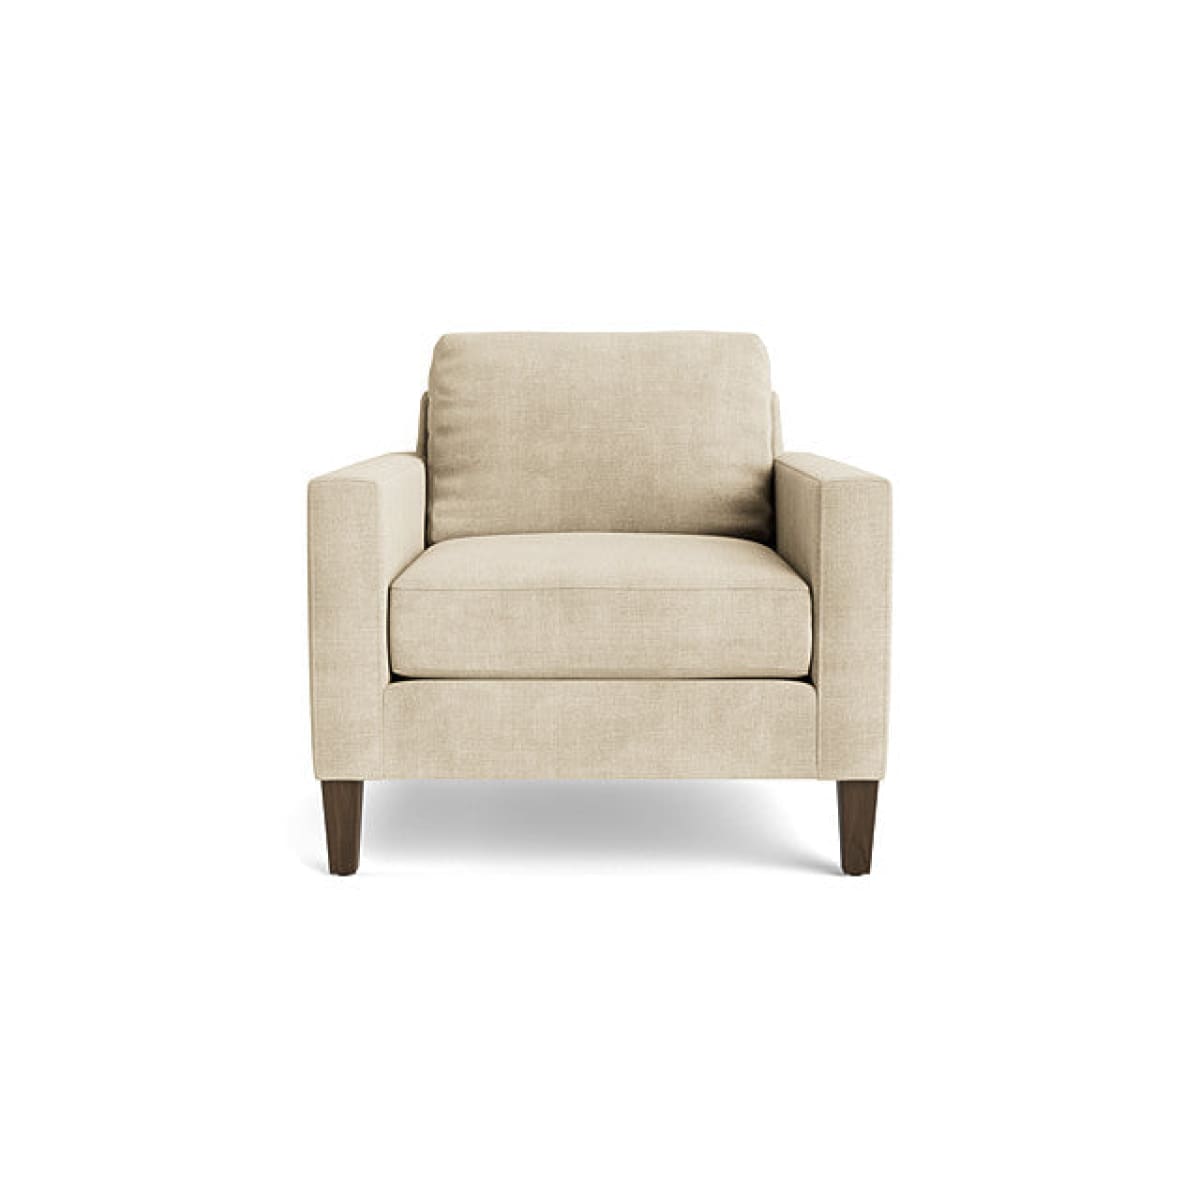 Kent Accent Chair - Analogy Sand